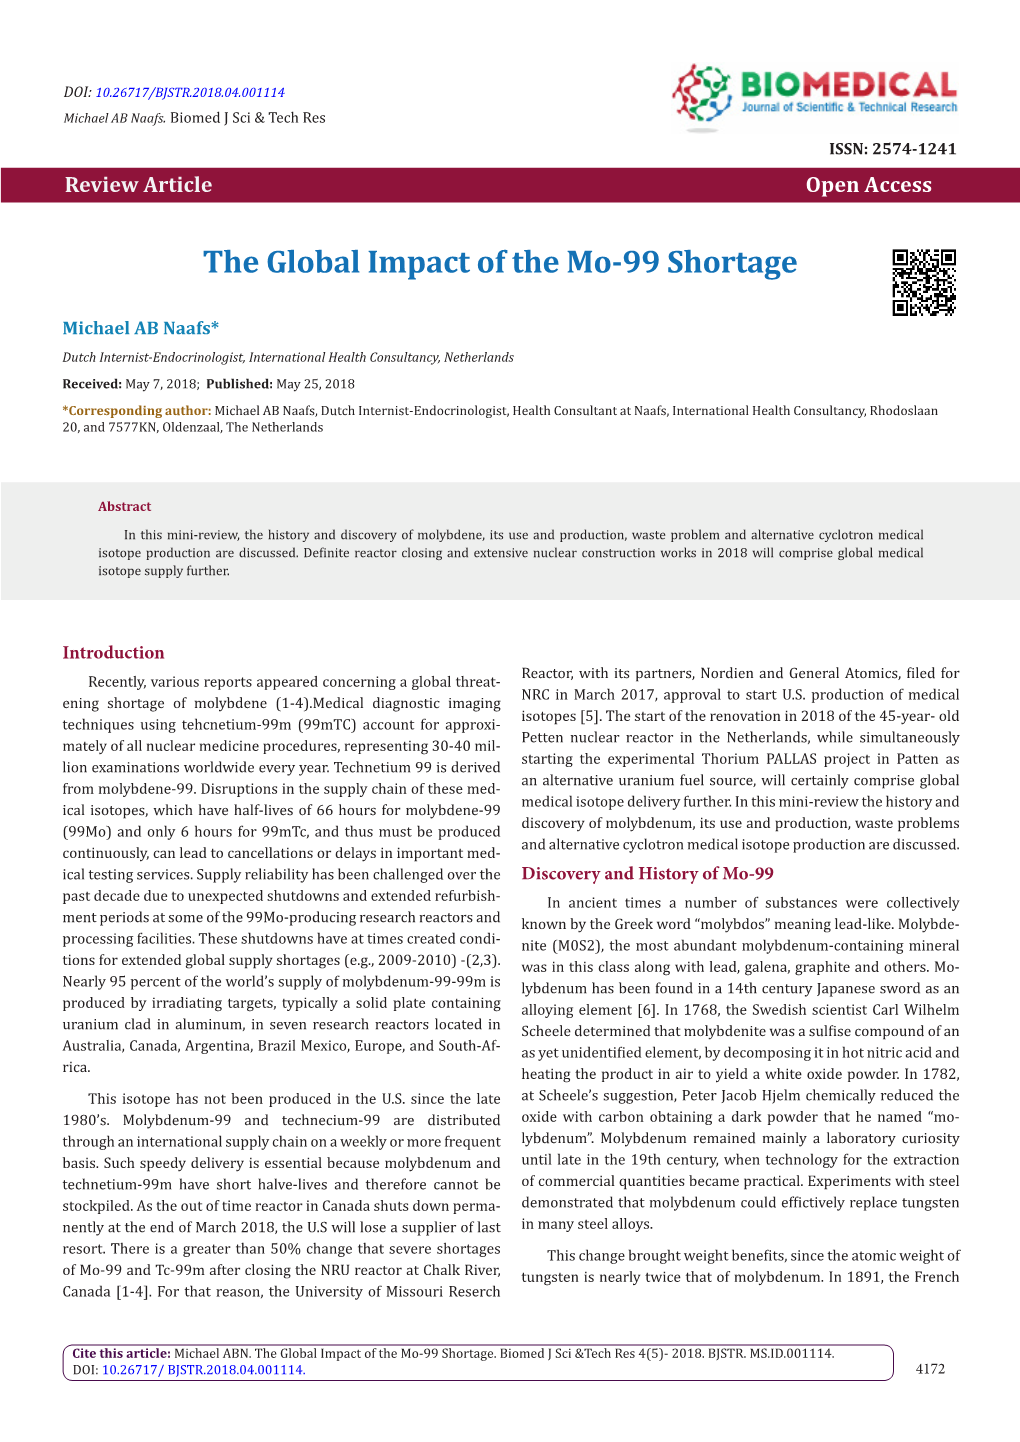 The Global Impact of the Mo-99 Shortage